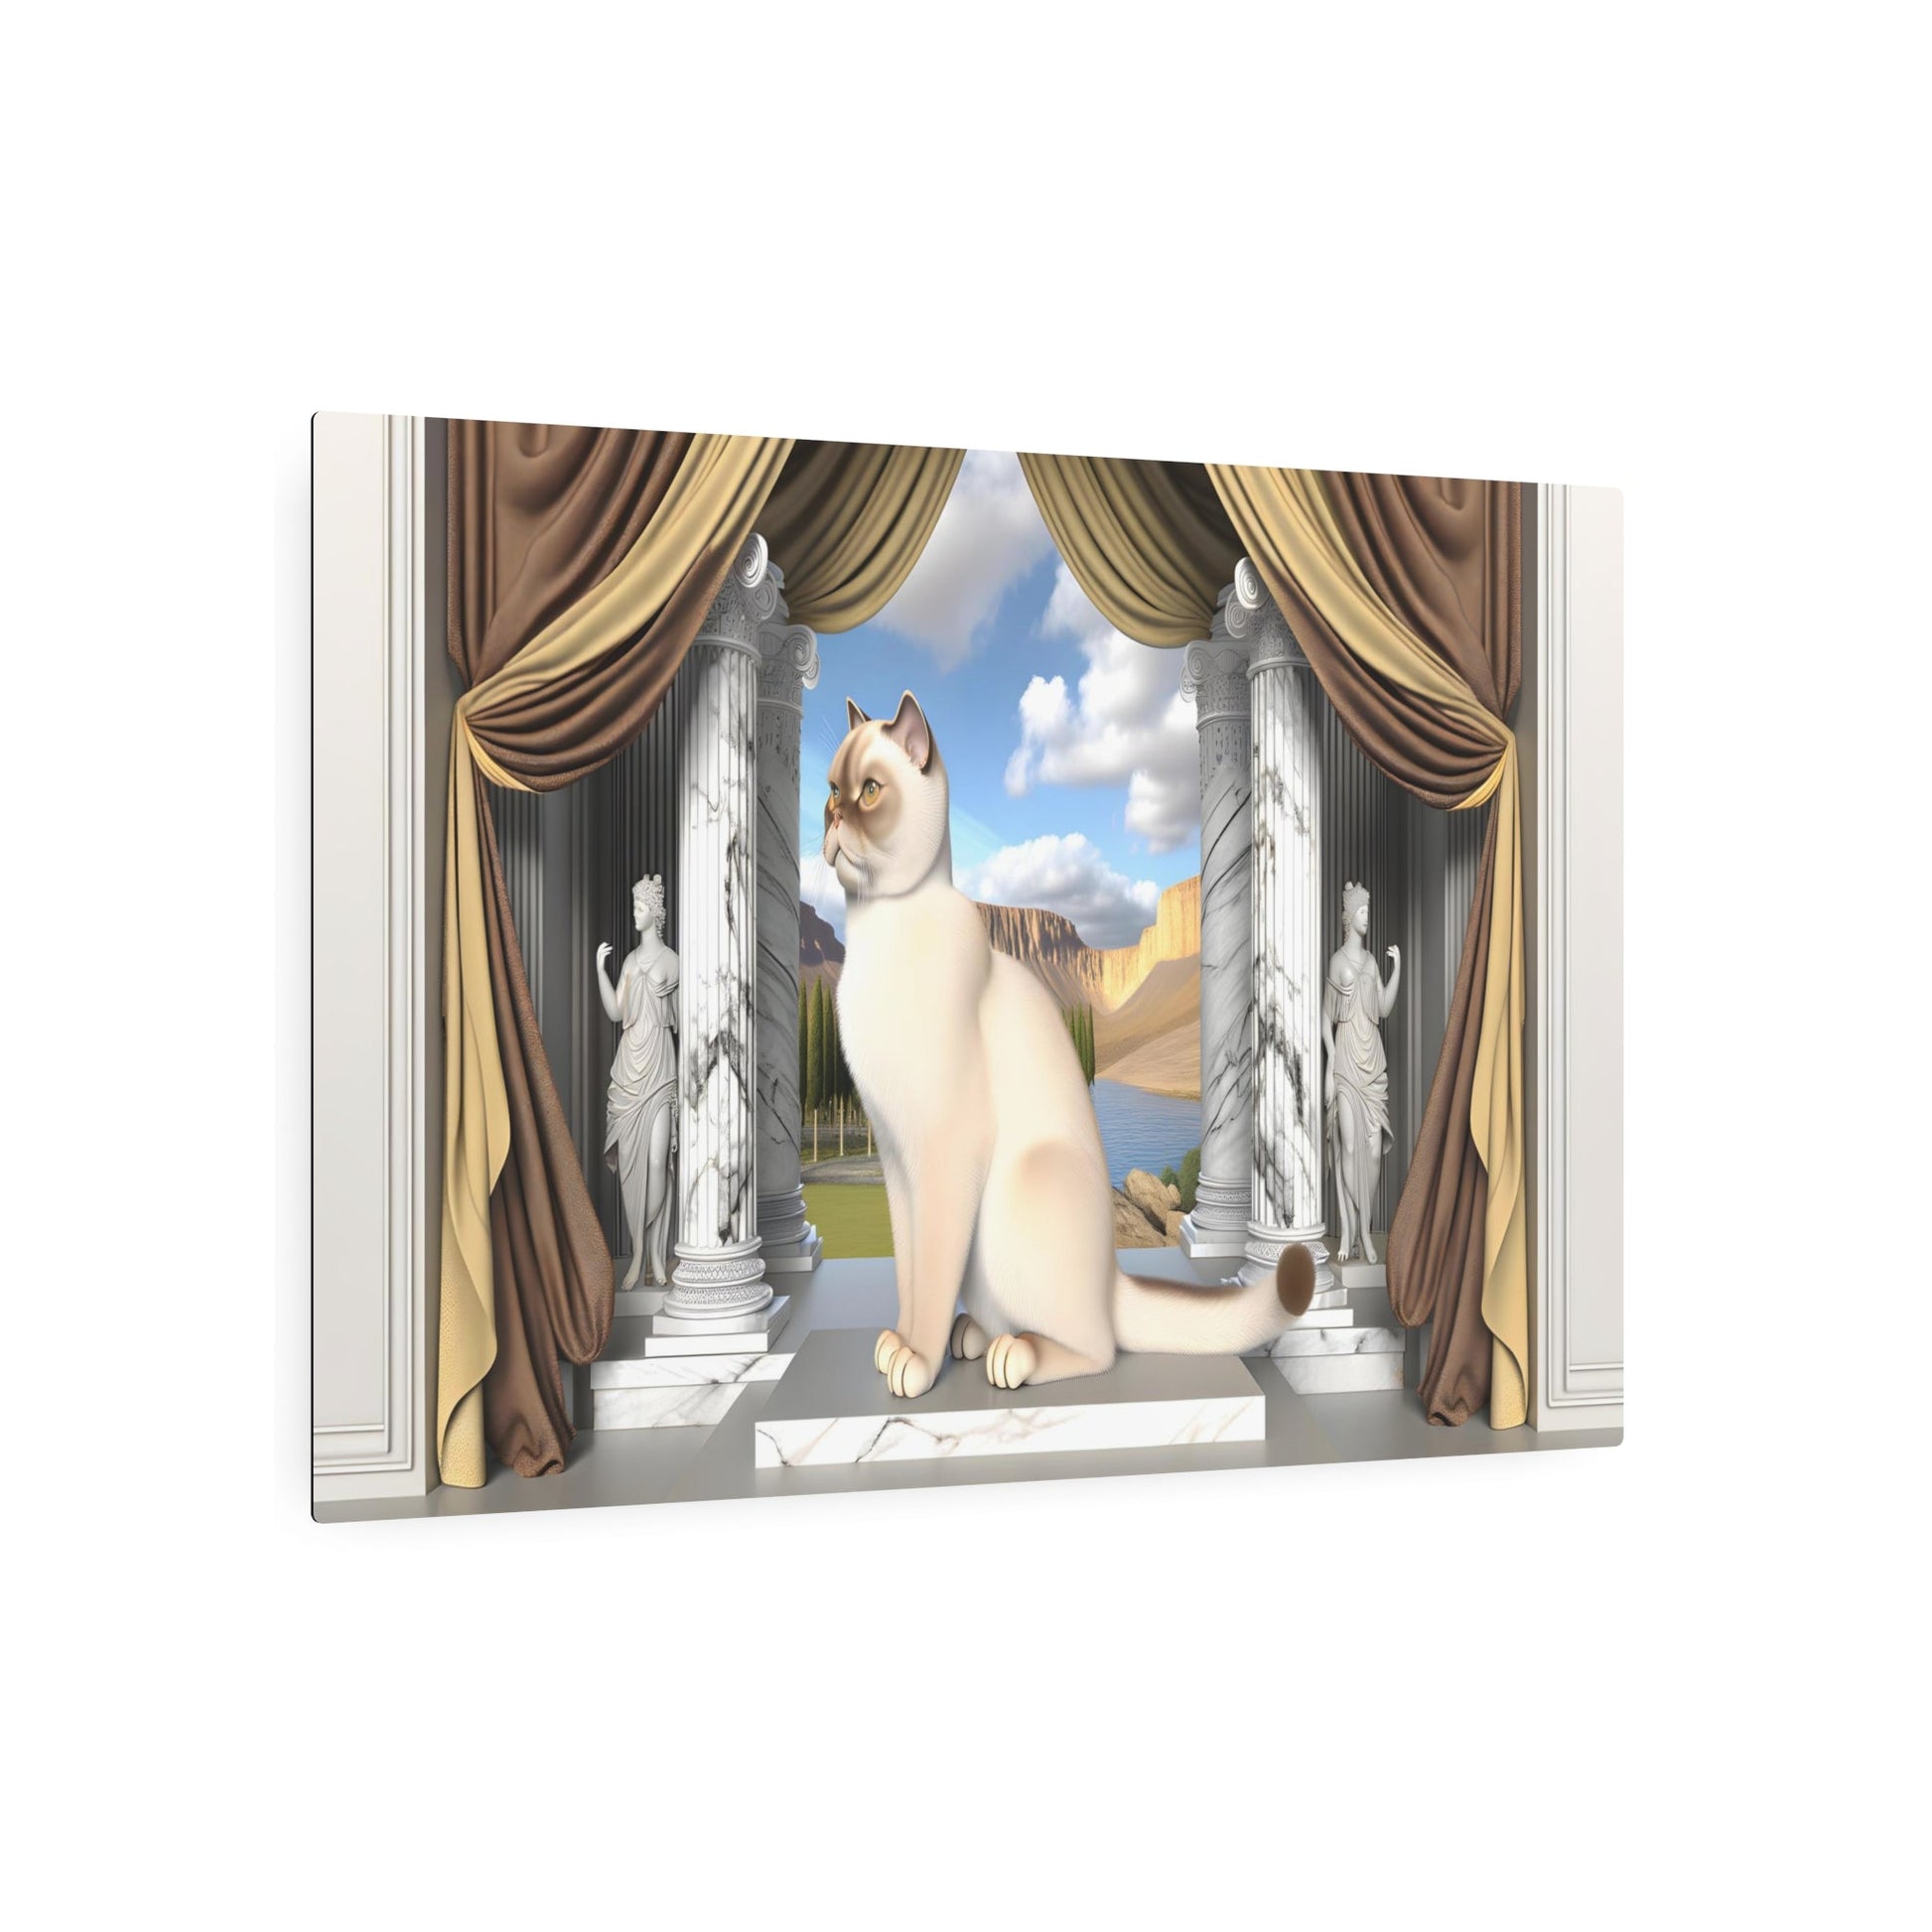 Metal Poster Art | "Neoclassical Aristocratic Cat Art Print - Western Neoclassicism Art Style Featuring Regal Feline with Marble Columns and Classic Drap - Metal Poster Art 36″ x 24″ (Horizontal) 0.12''